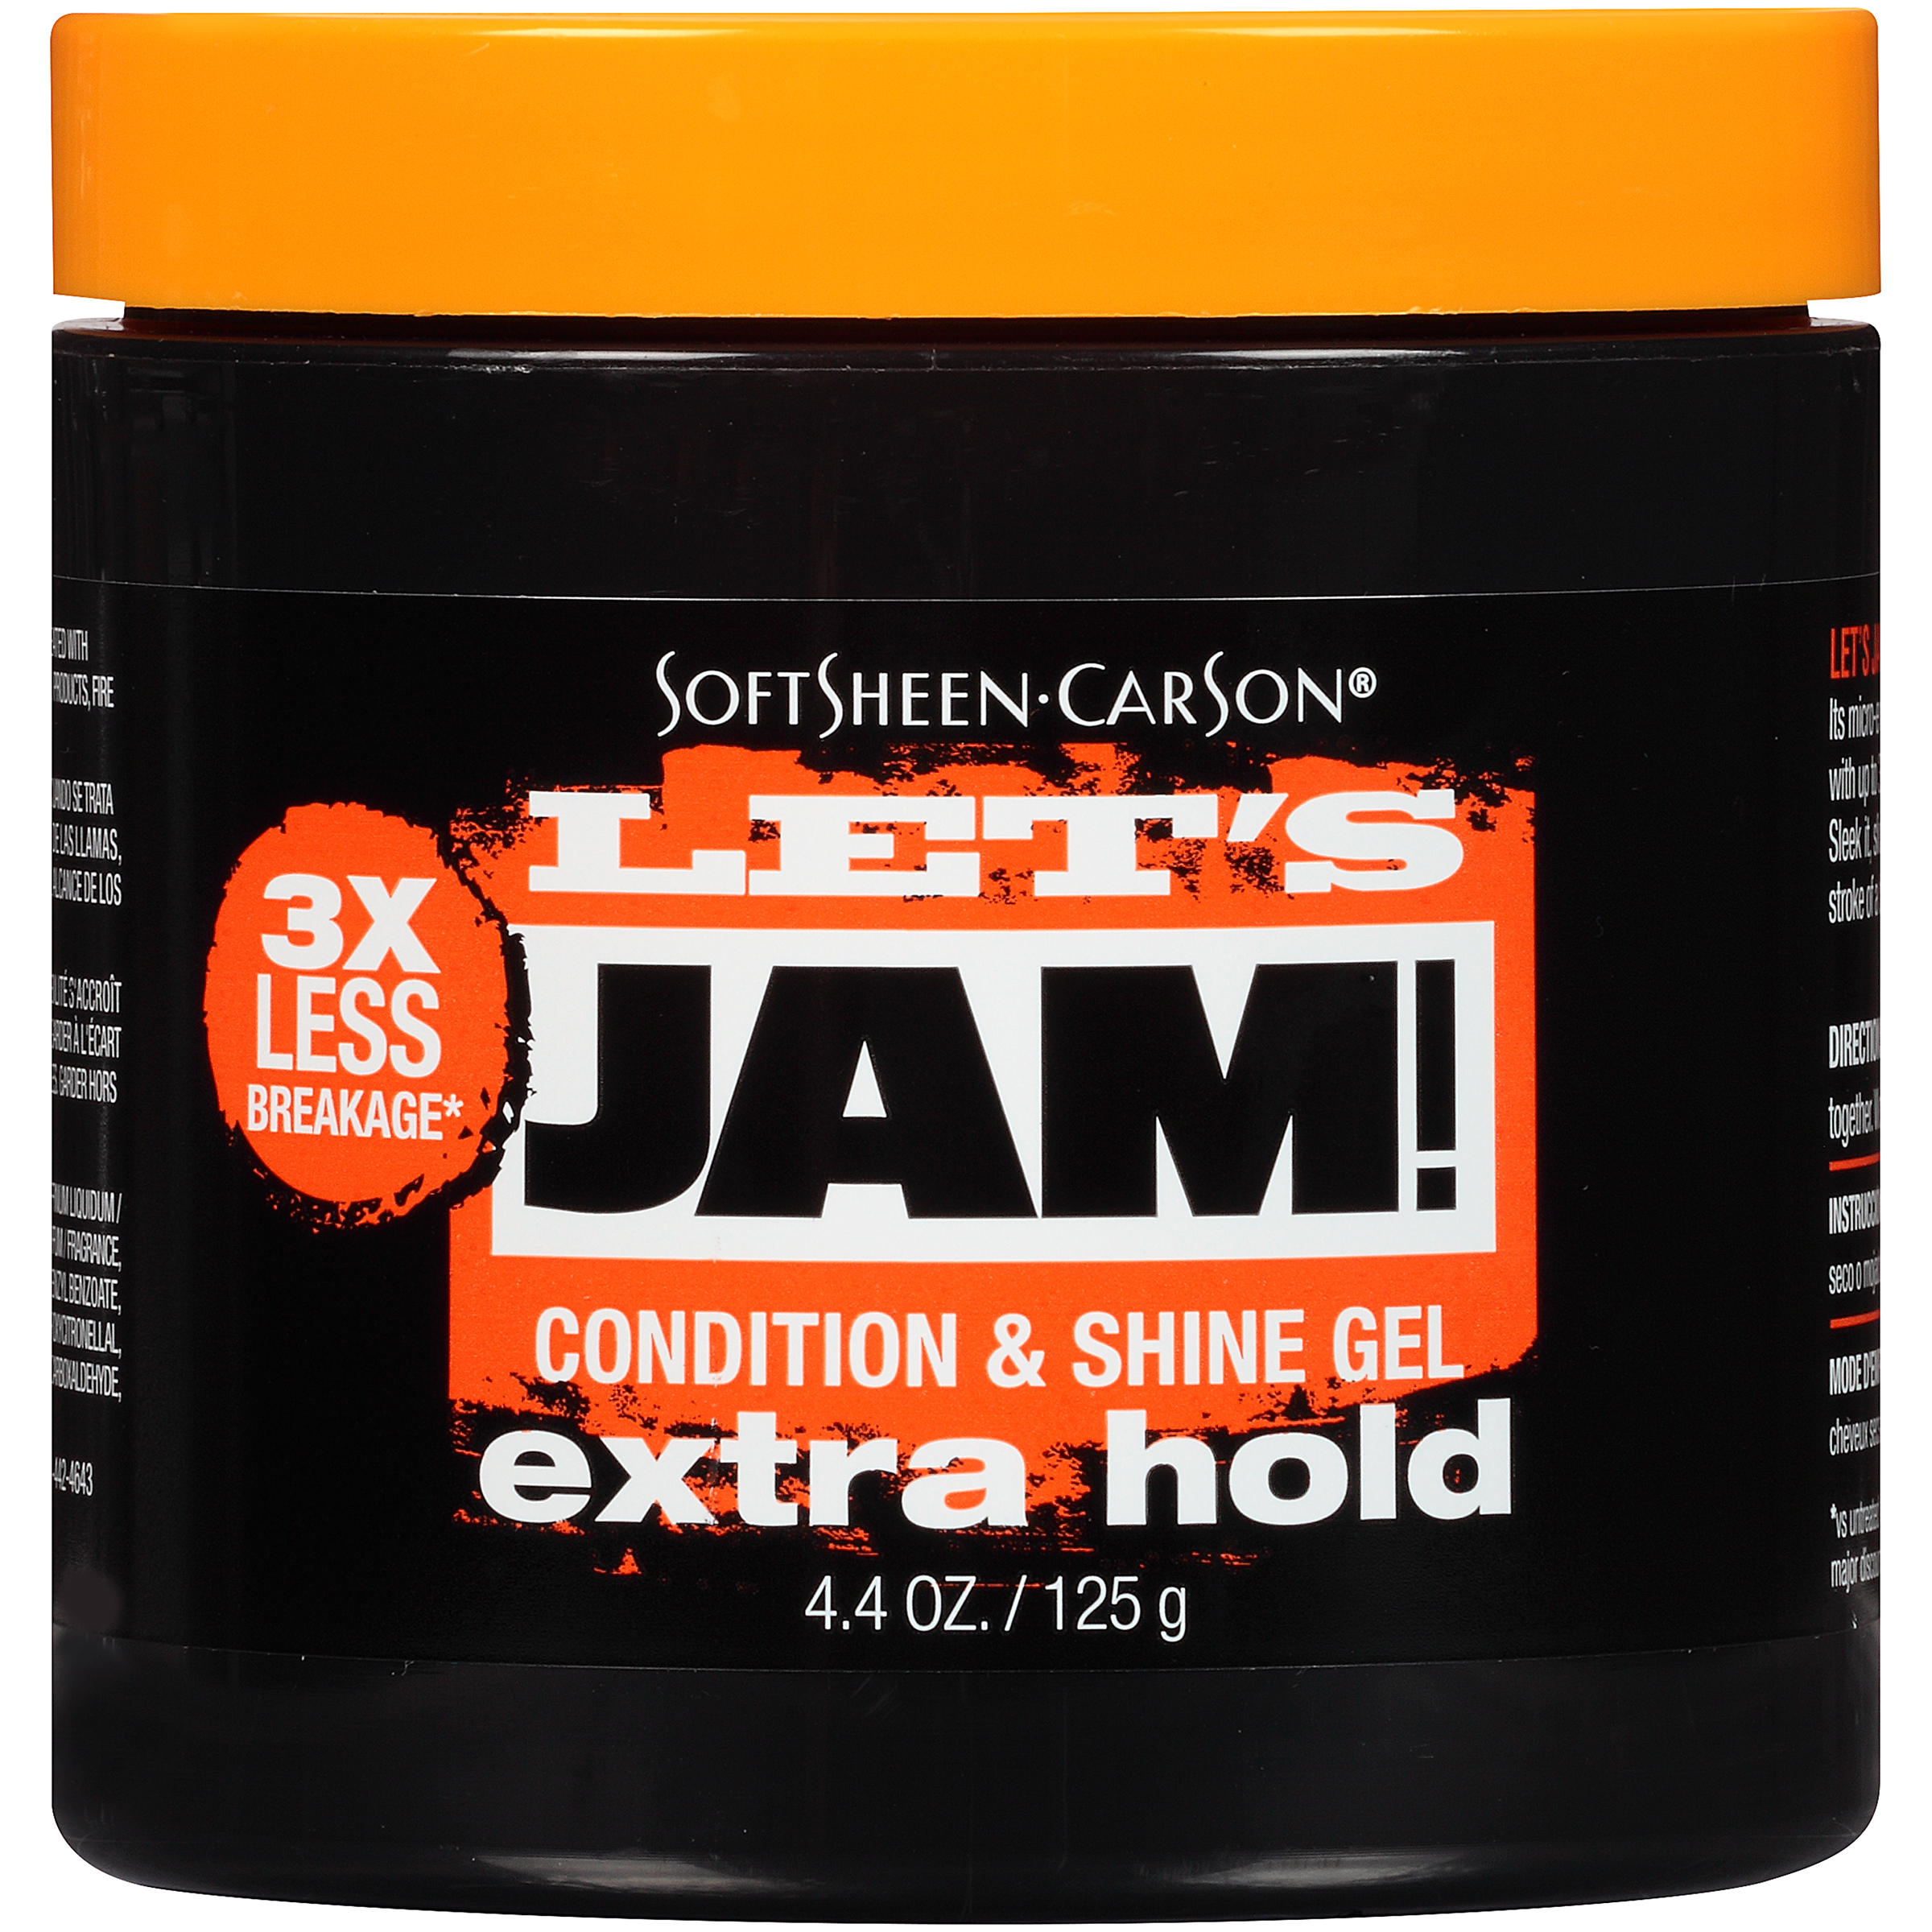 Let's Jam Soft Sheen-Carson ! Shining & Conditioning Gel, Extra Hold, 4.4 oz (125 g)